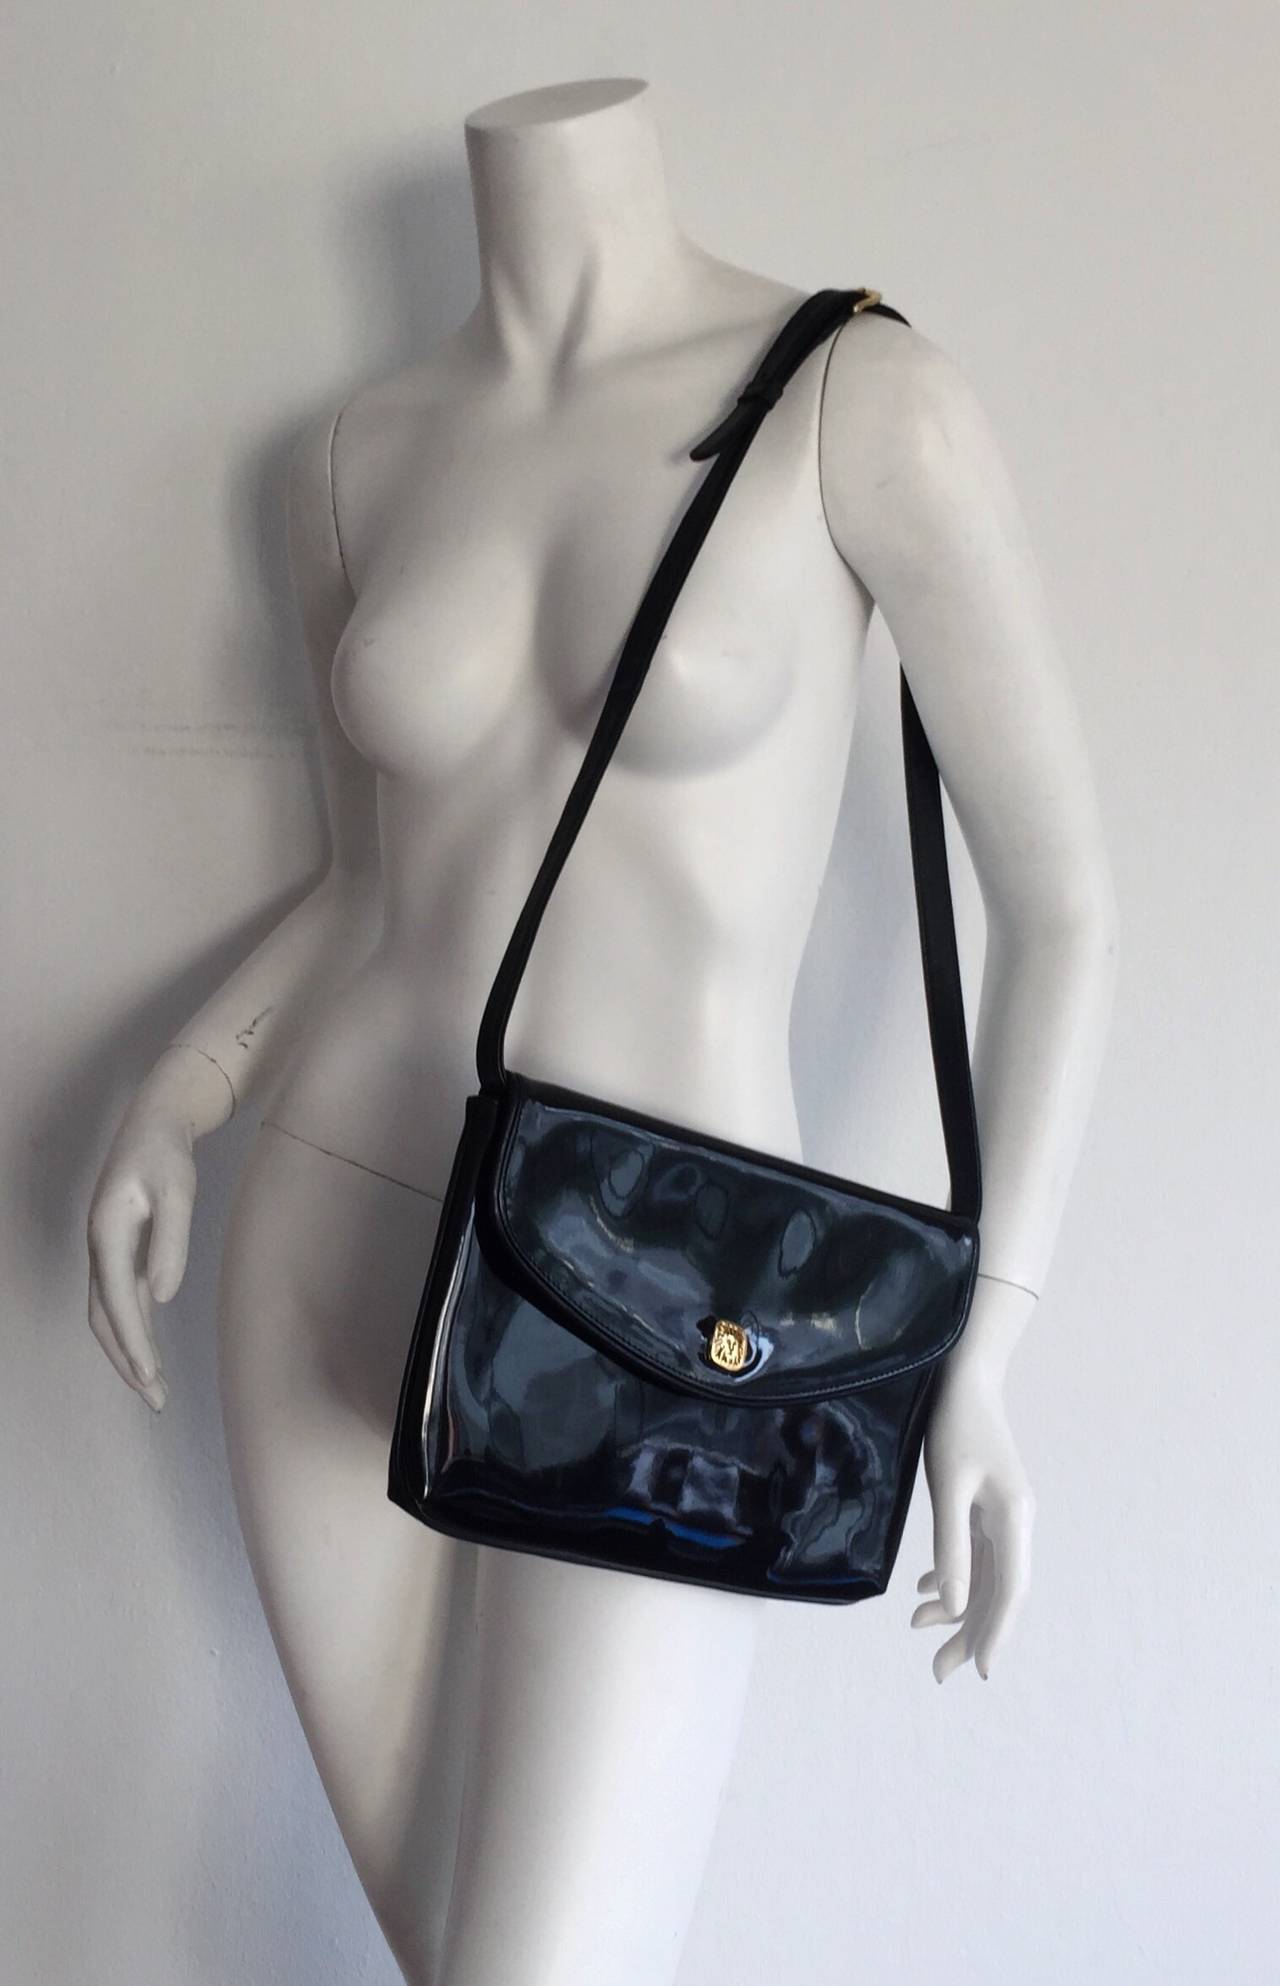 Chic vintage Anne Klein for Oroton black patent leather convertible clutch/purse/crossbody purse! Signature Klein lion emblem at front. Classic oversized envelope style. Removable strap, that can serve as a shoulder bag, or crossbody bag. Easily